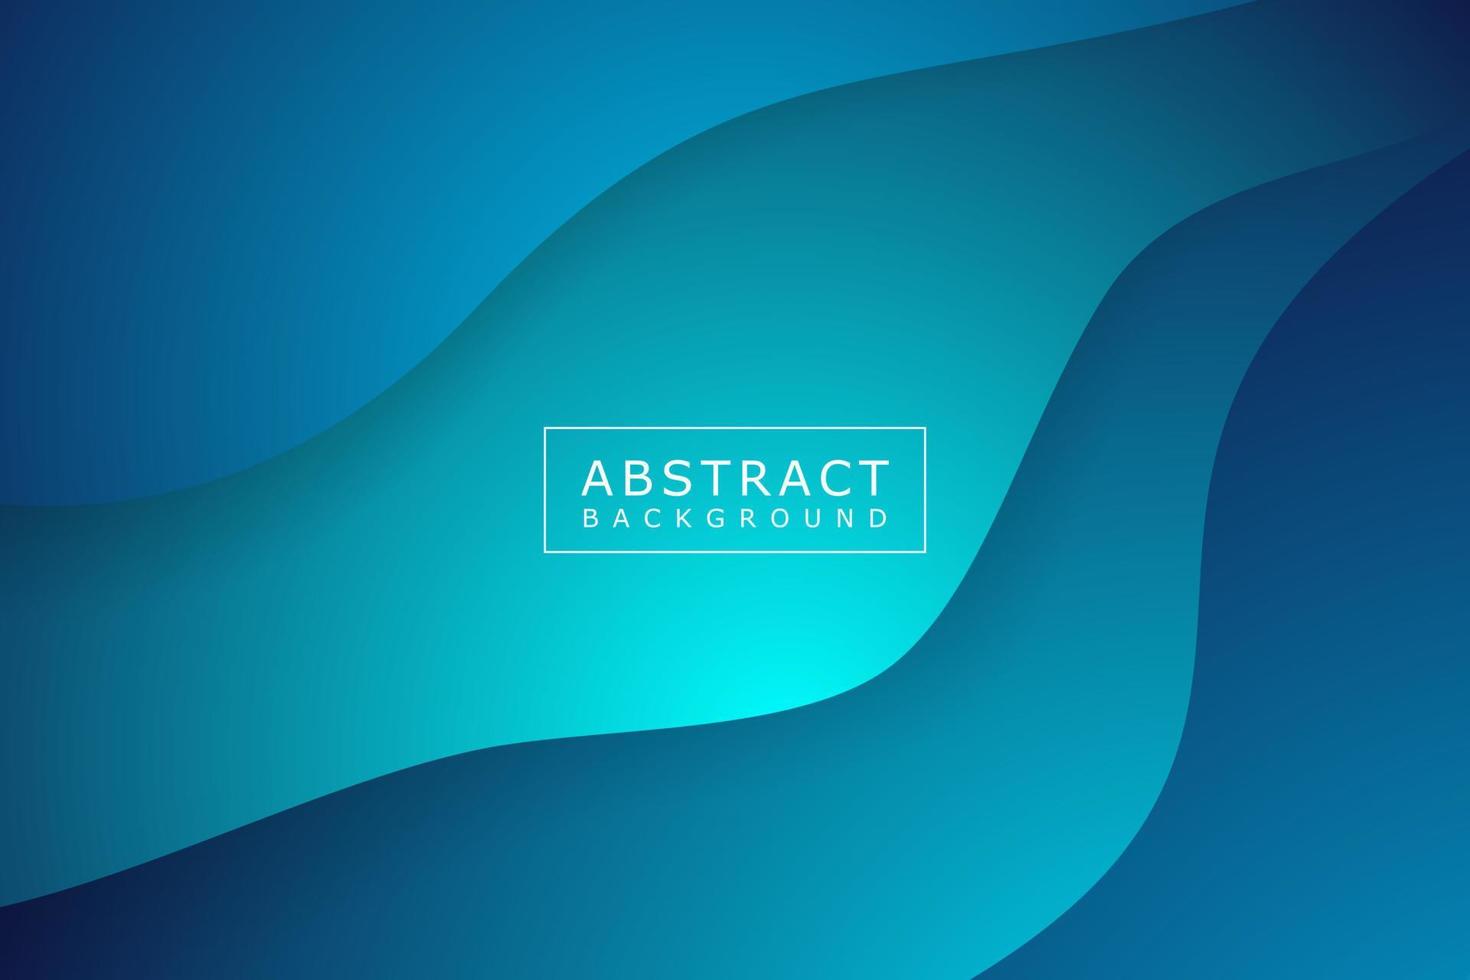 Abstract blue curve overlap background. Modern bright gradient art backdrop or banner for business. Vector illustration